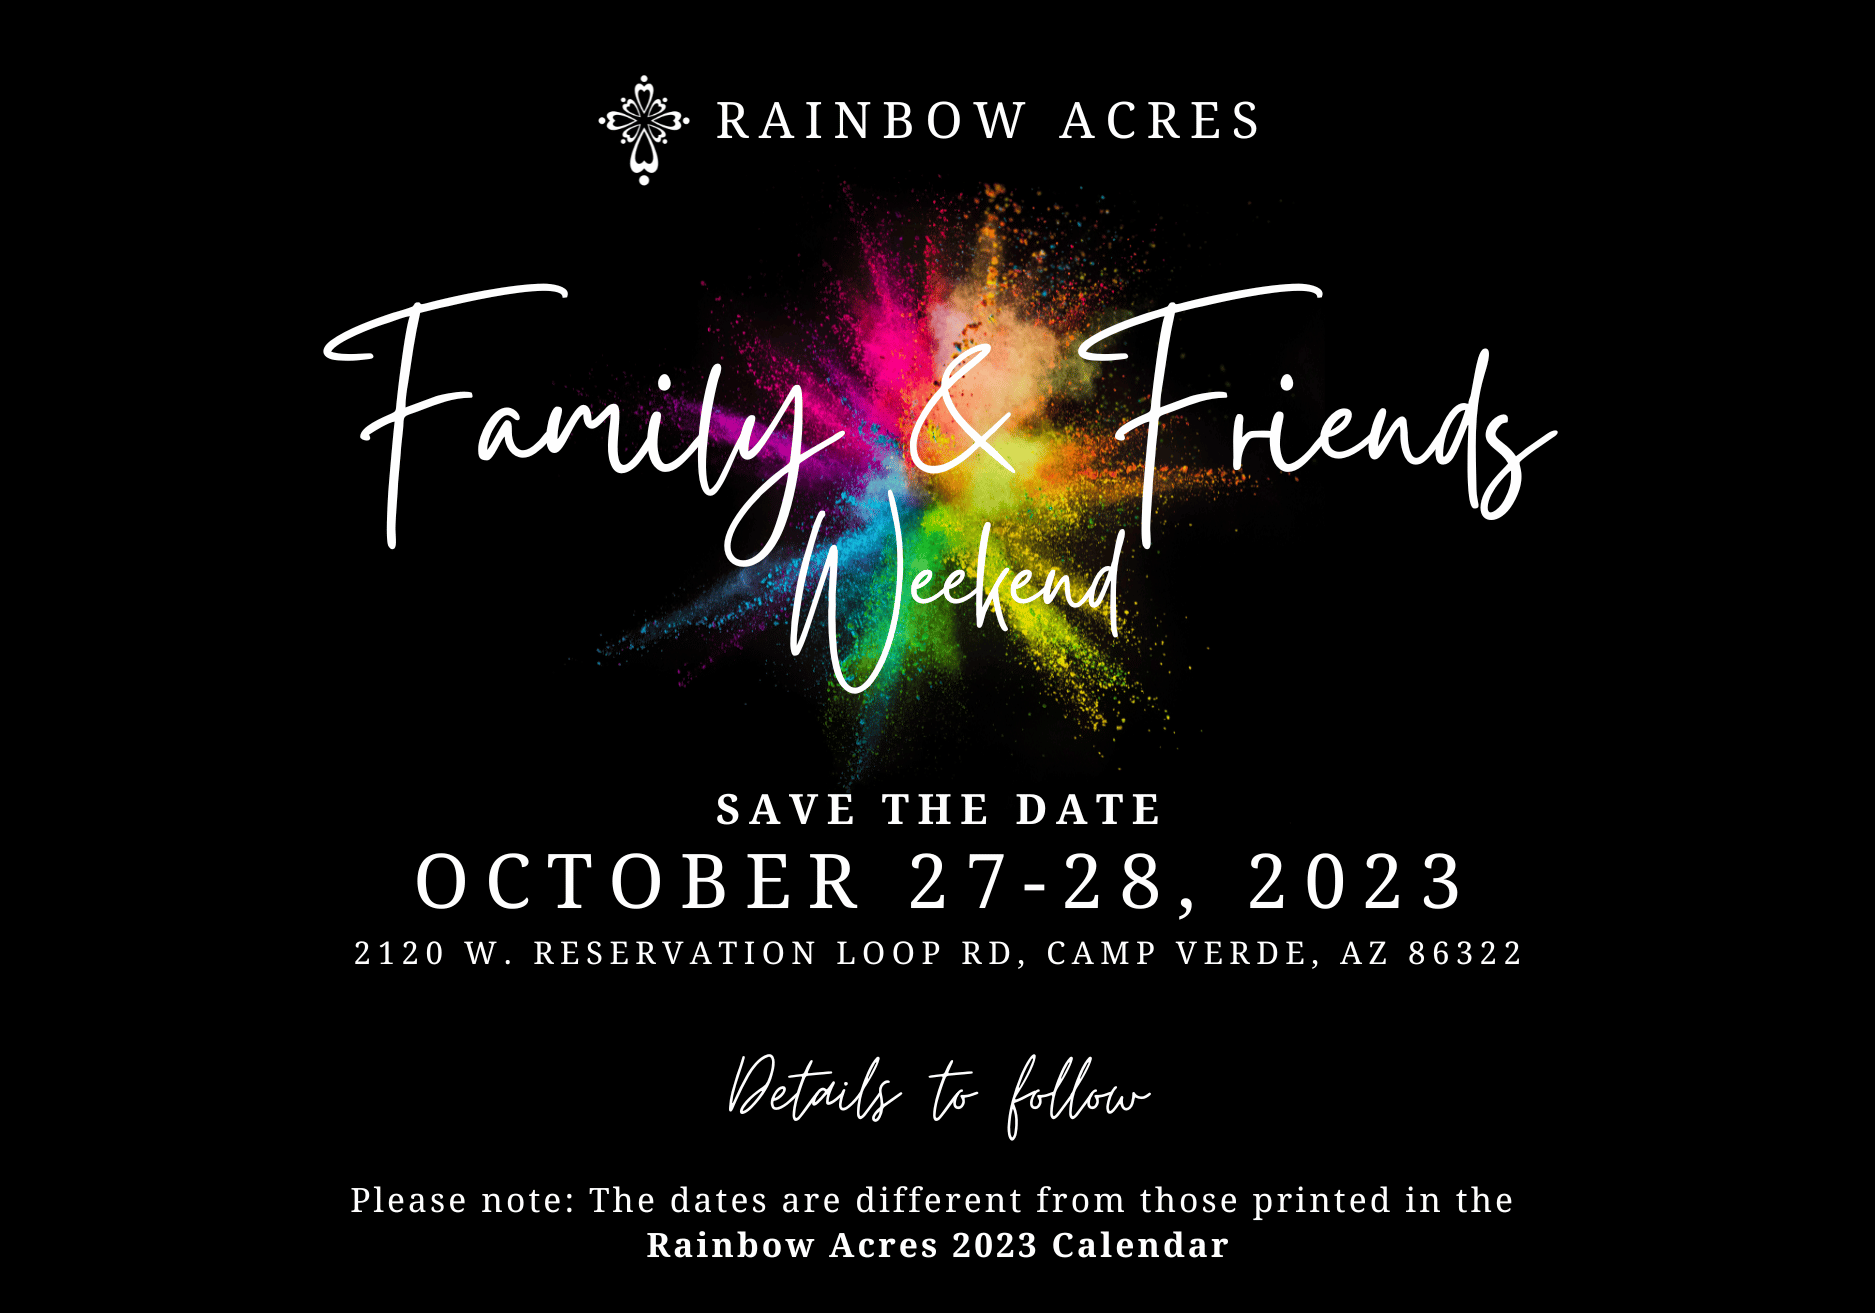 Rainbow Acres' Family and Friends Weekend save the date invitation. Family & Friends weekend will be held on October 27-28 this year.